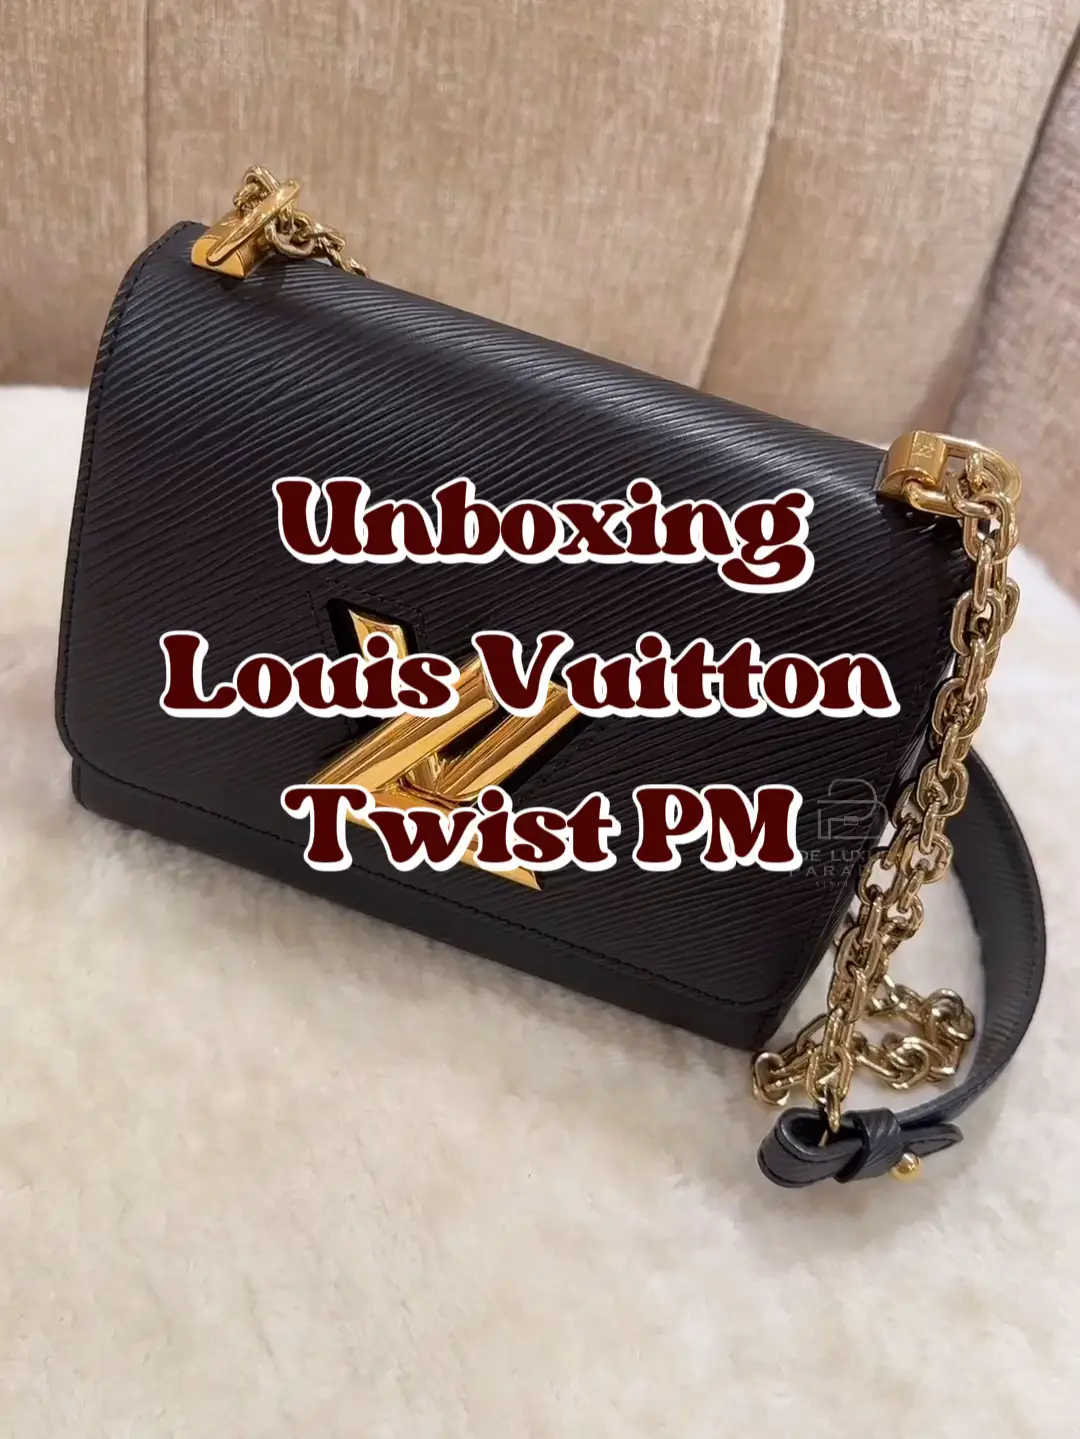 Unboxing Louis Vuitton Totally Pm